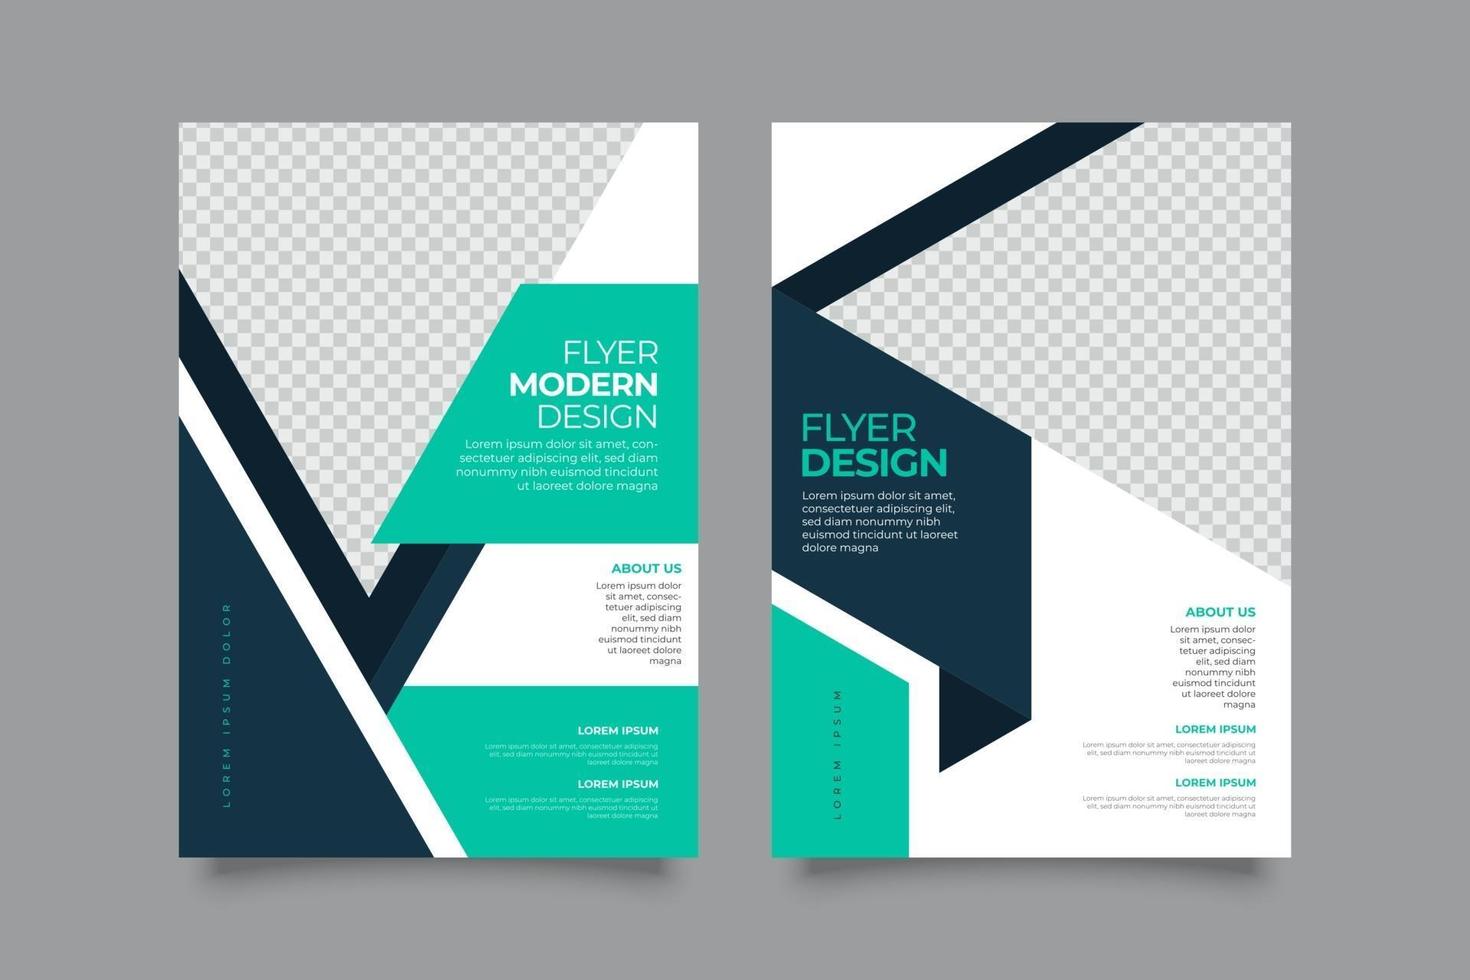 Webinar cool Flyer Template with Shapes vector